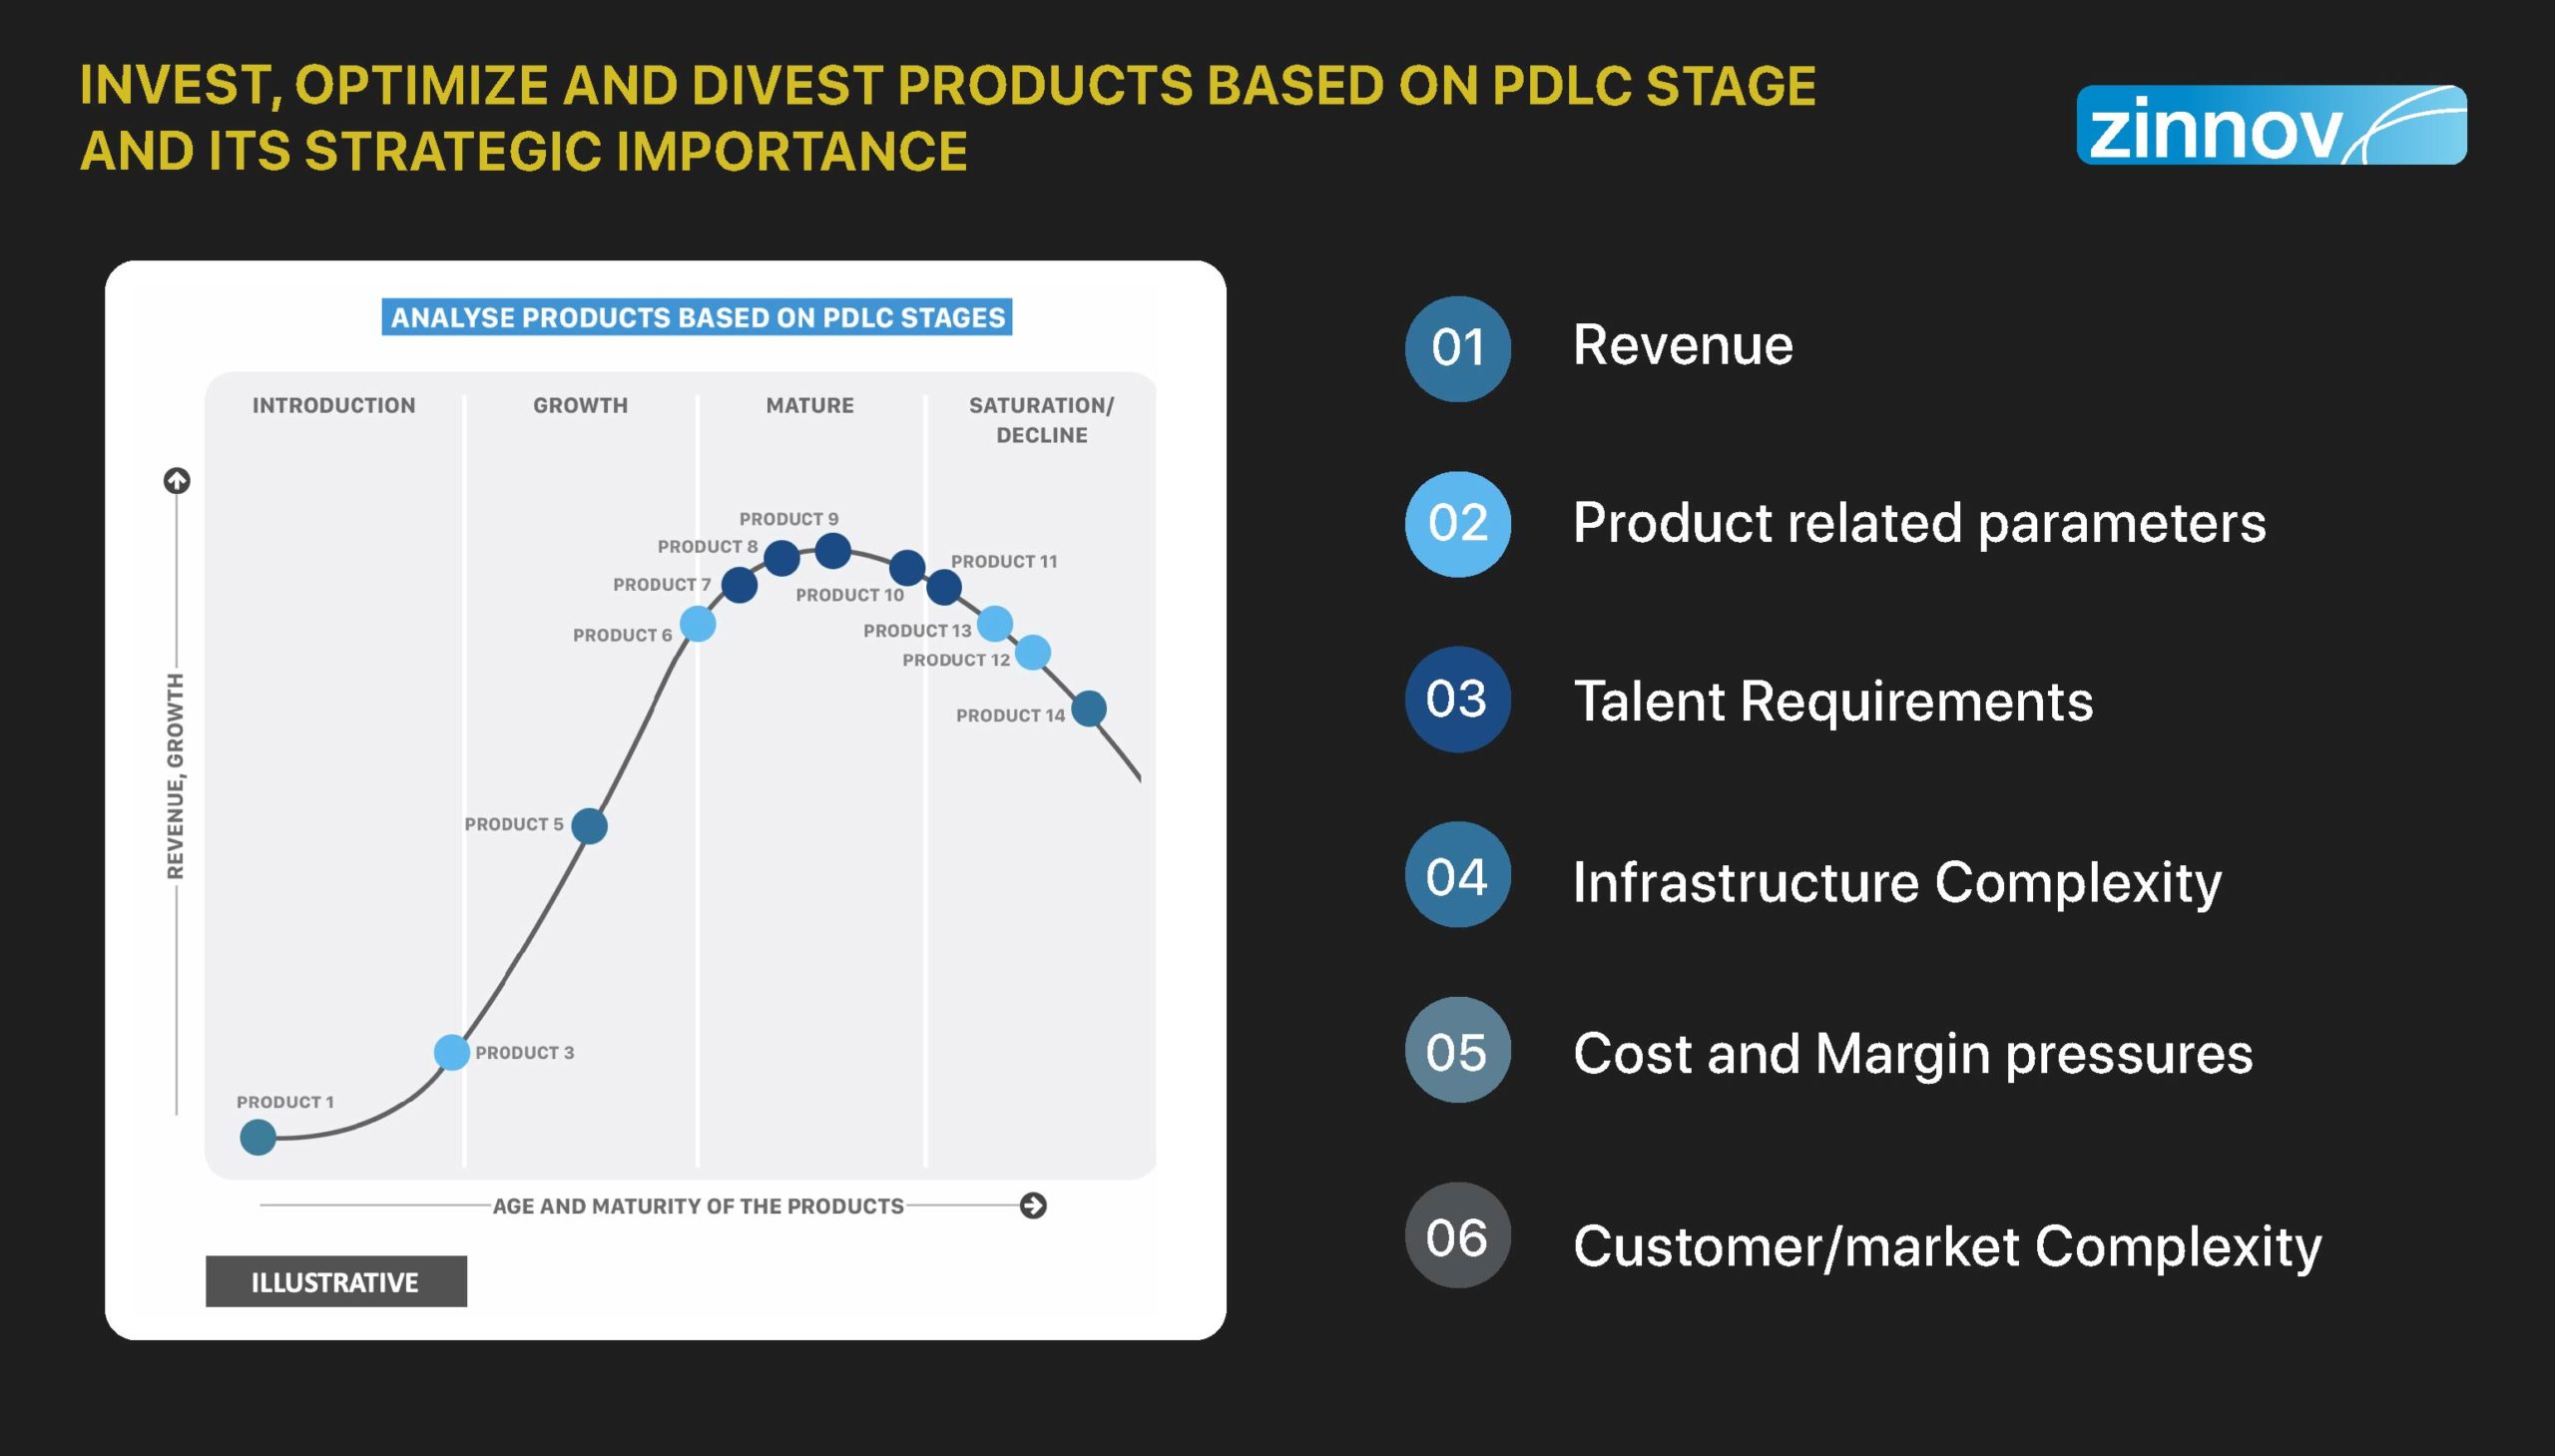 Invest, optimise and divest products based on PDLC stage and its strategic importance 